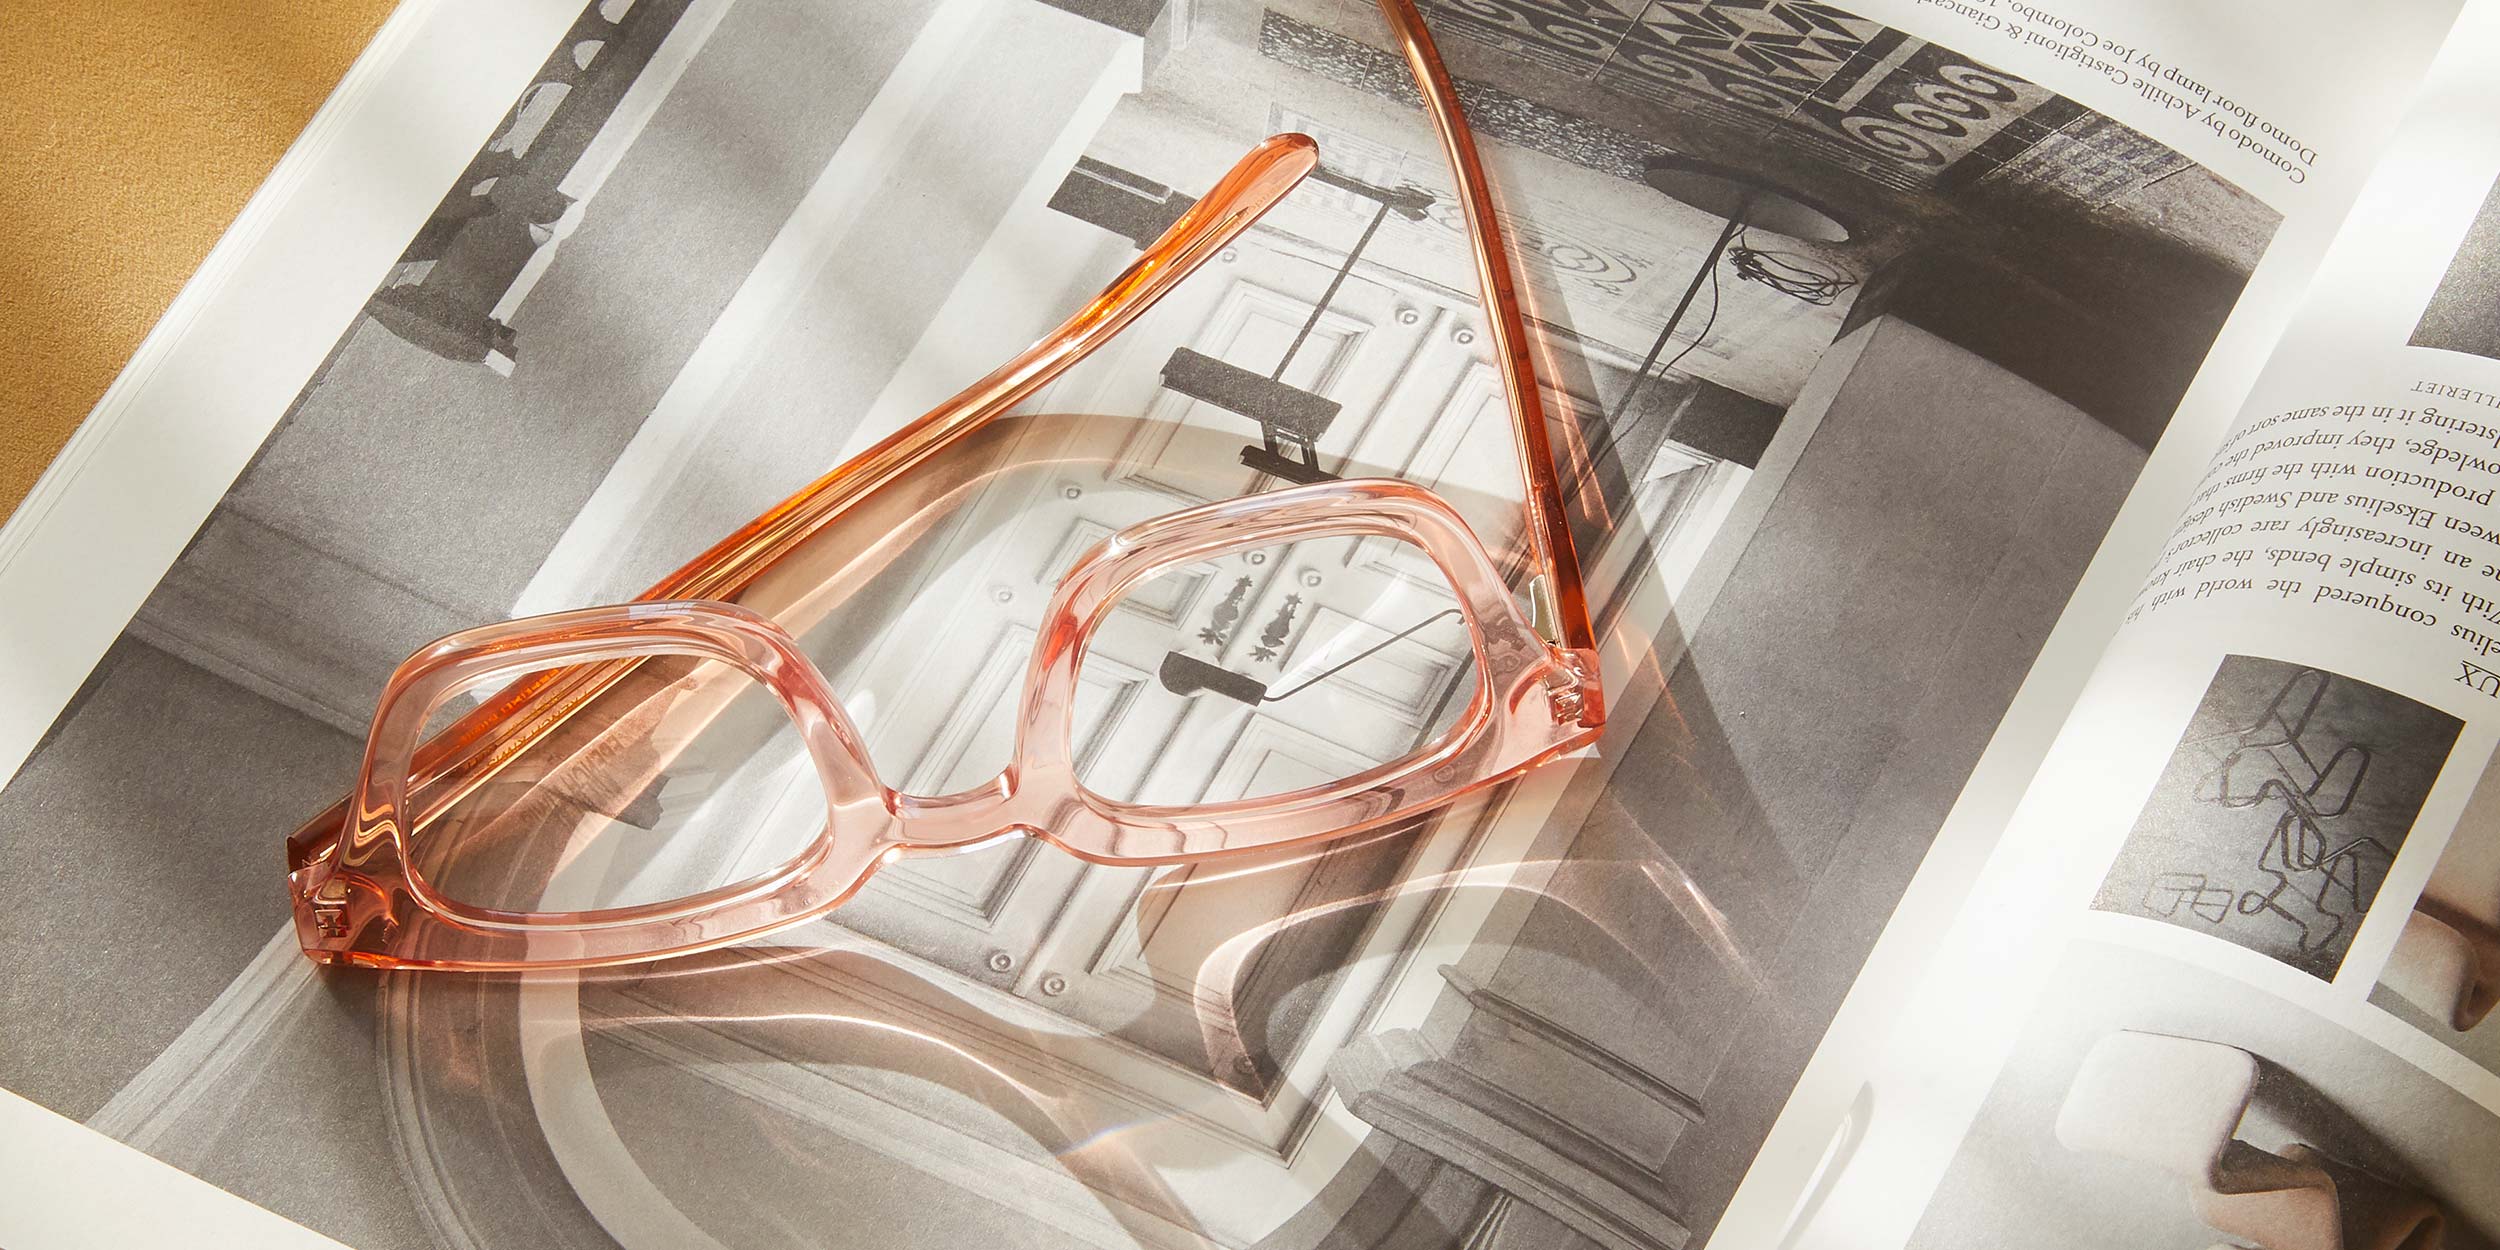 Photo Details of Ysée Black Marble Reading Glasses in a room